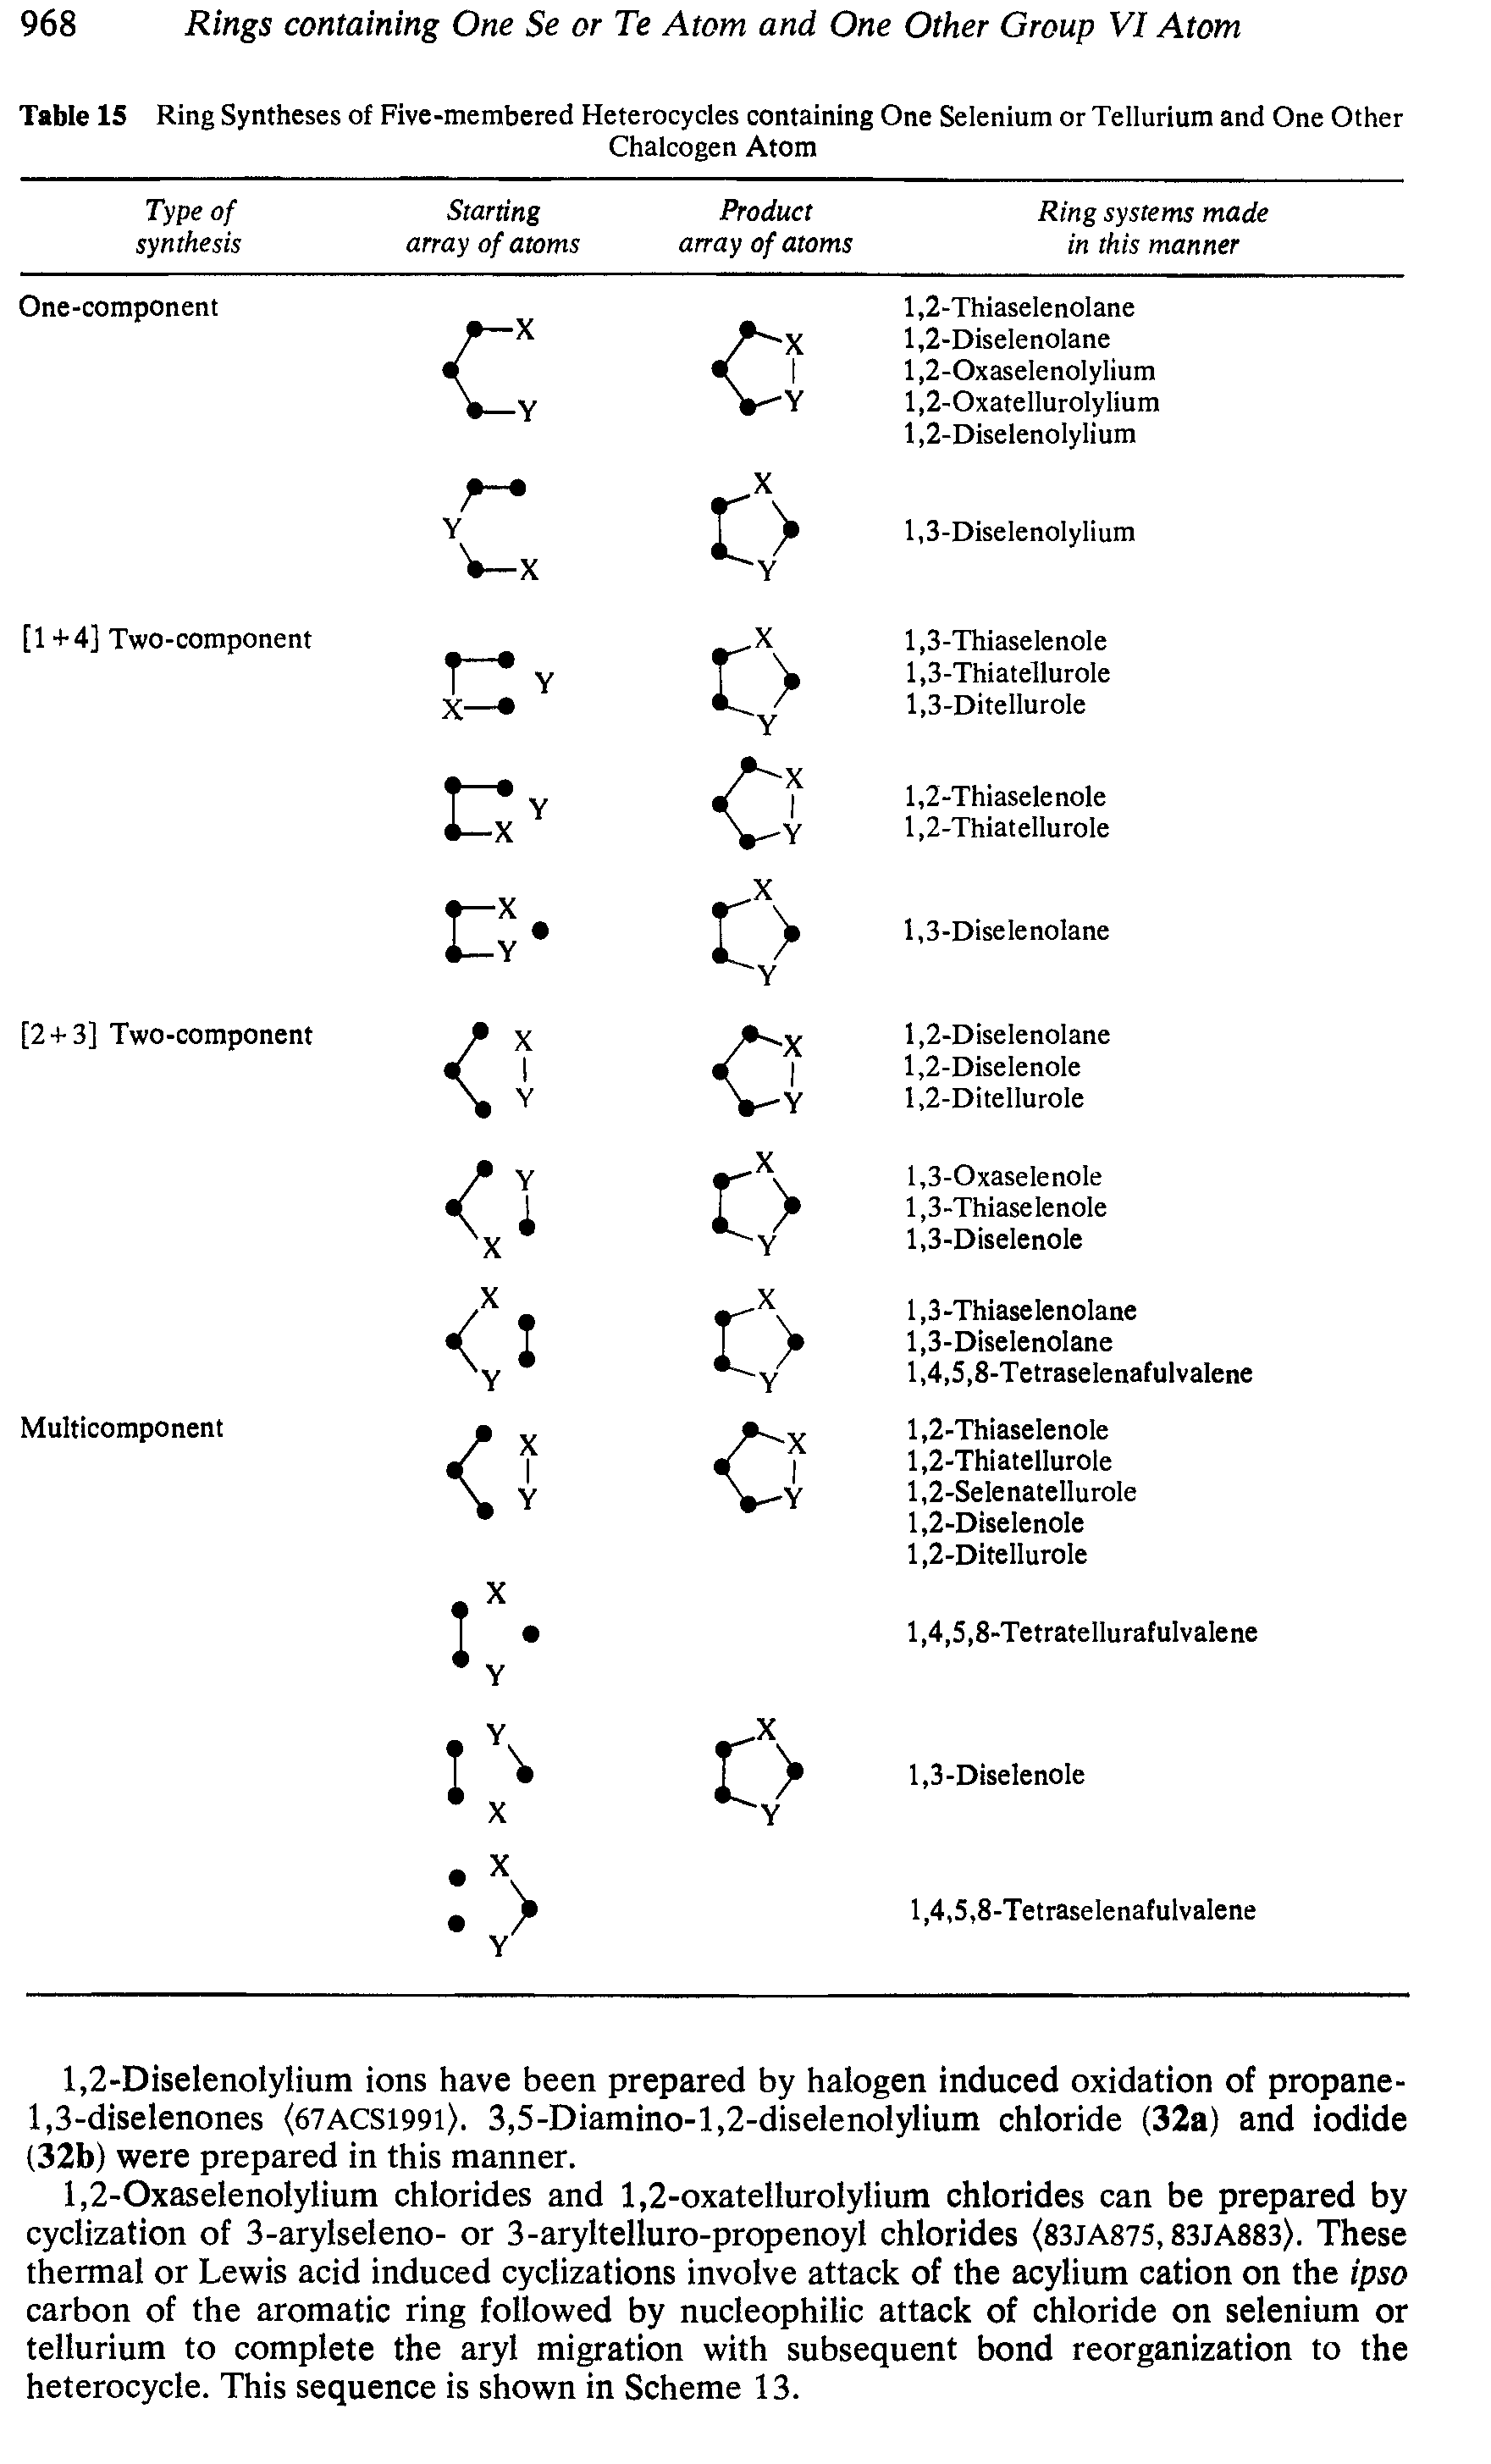 Table 15 Ring Syntheses of Five-membered Heterocycles containing One Selenium or Tellurium and One Other Chalcogen Atom ...